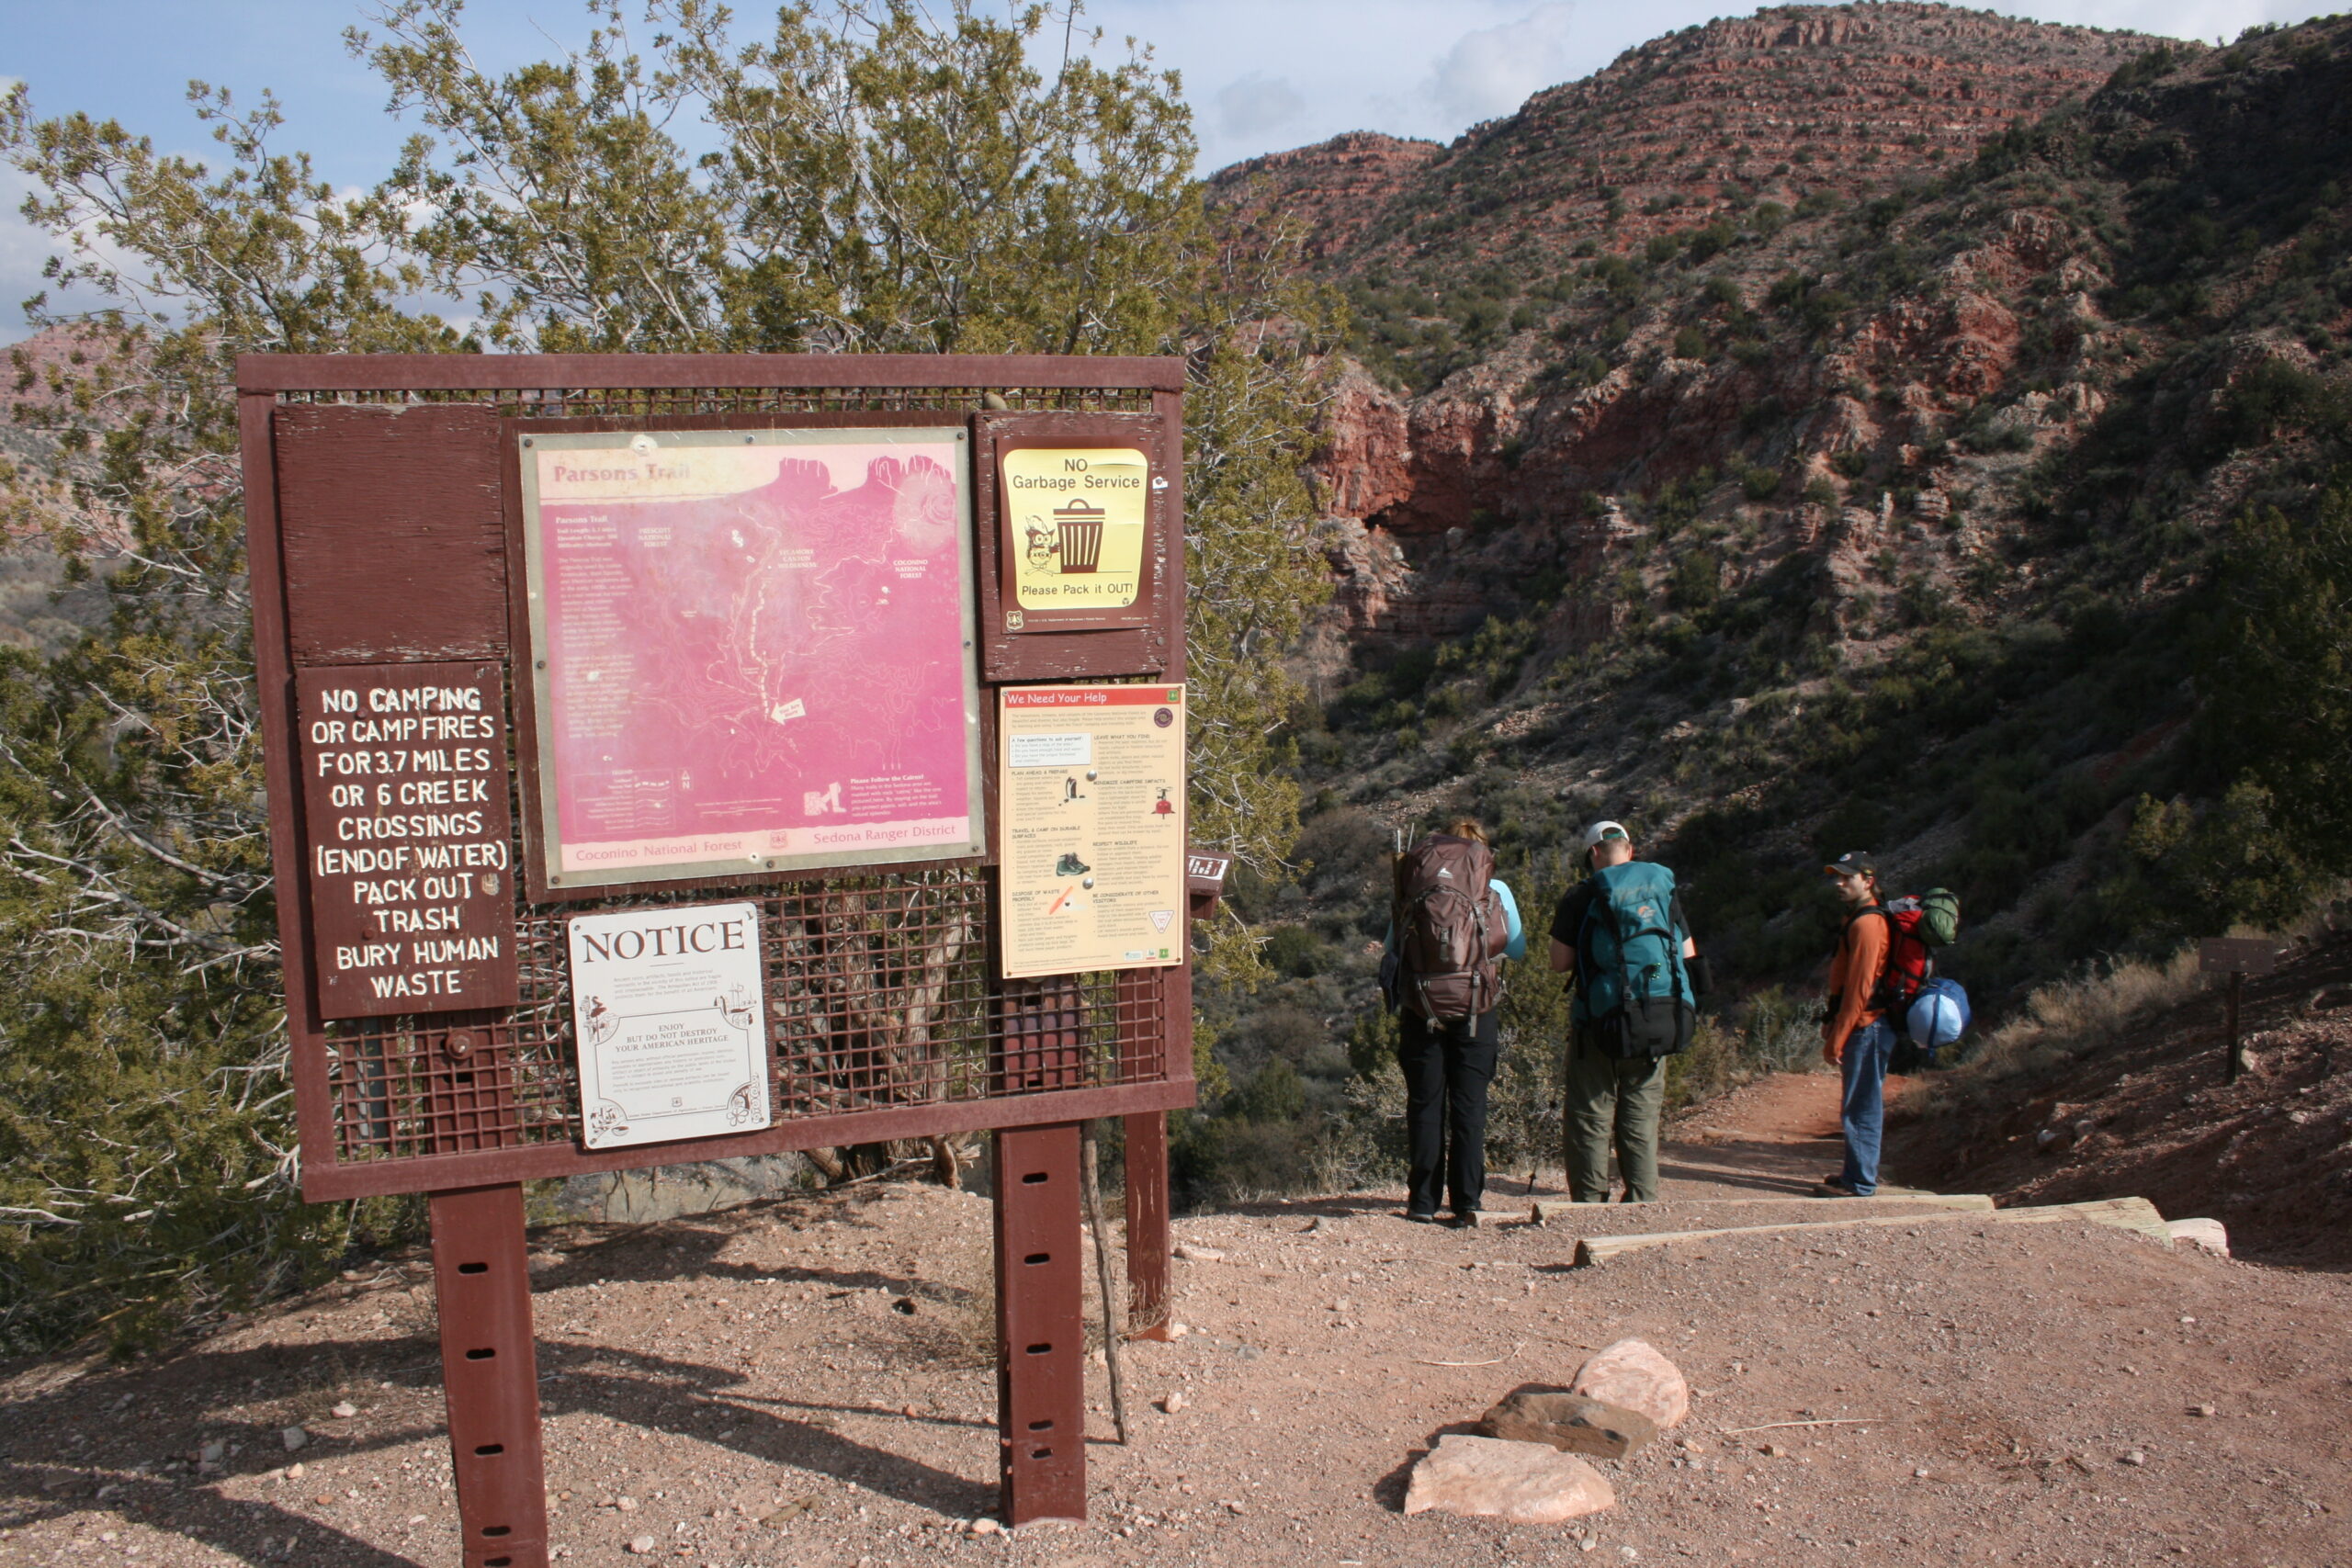 The Sycamore Canyon hike trailhead sign